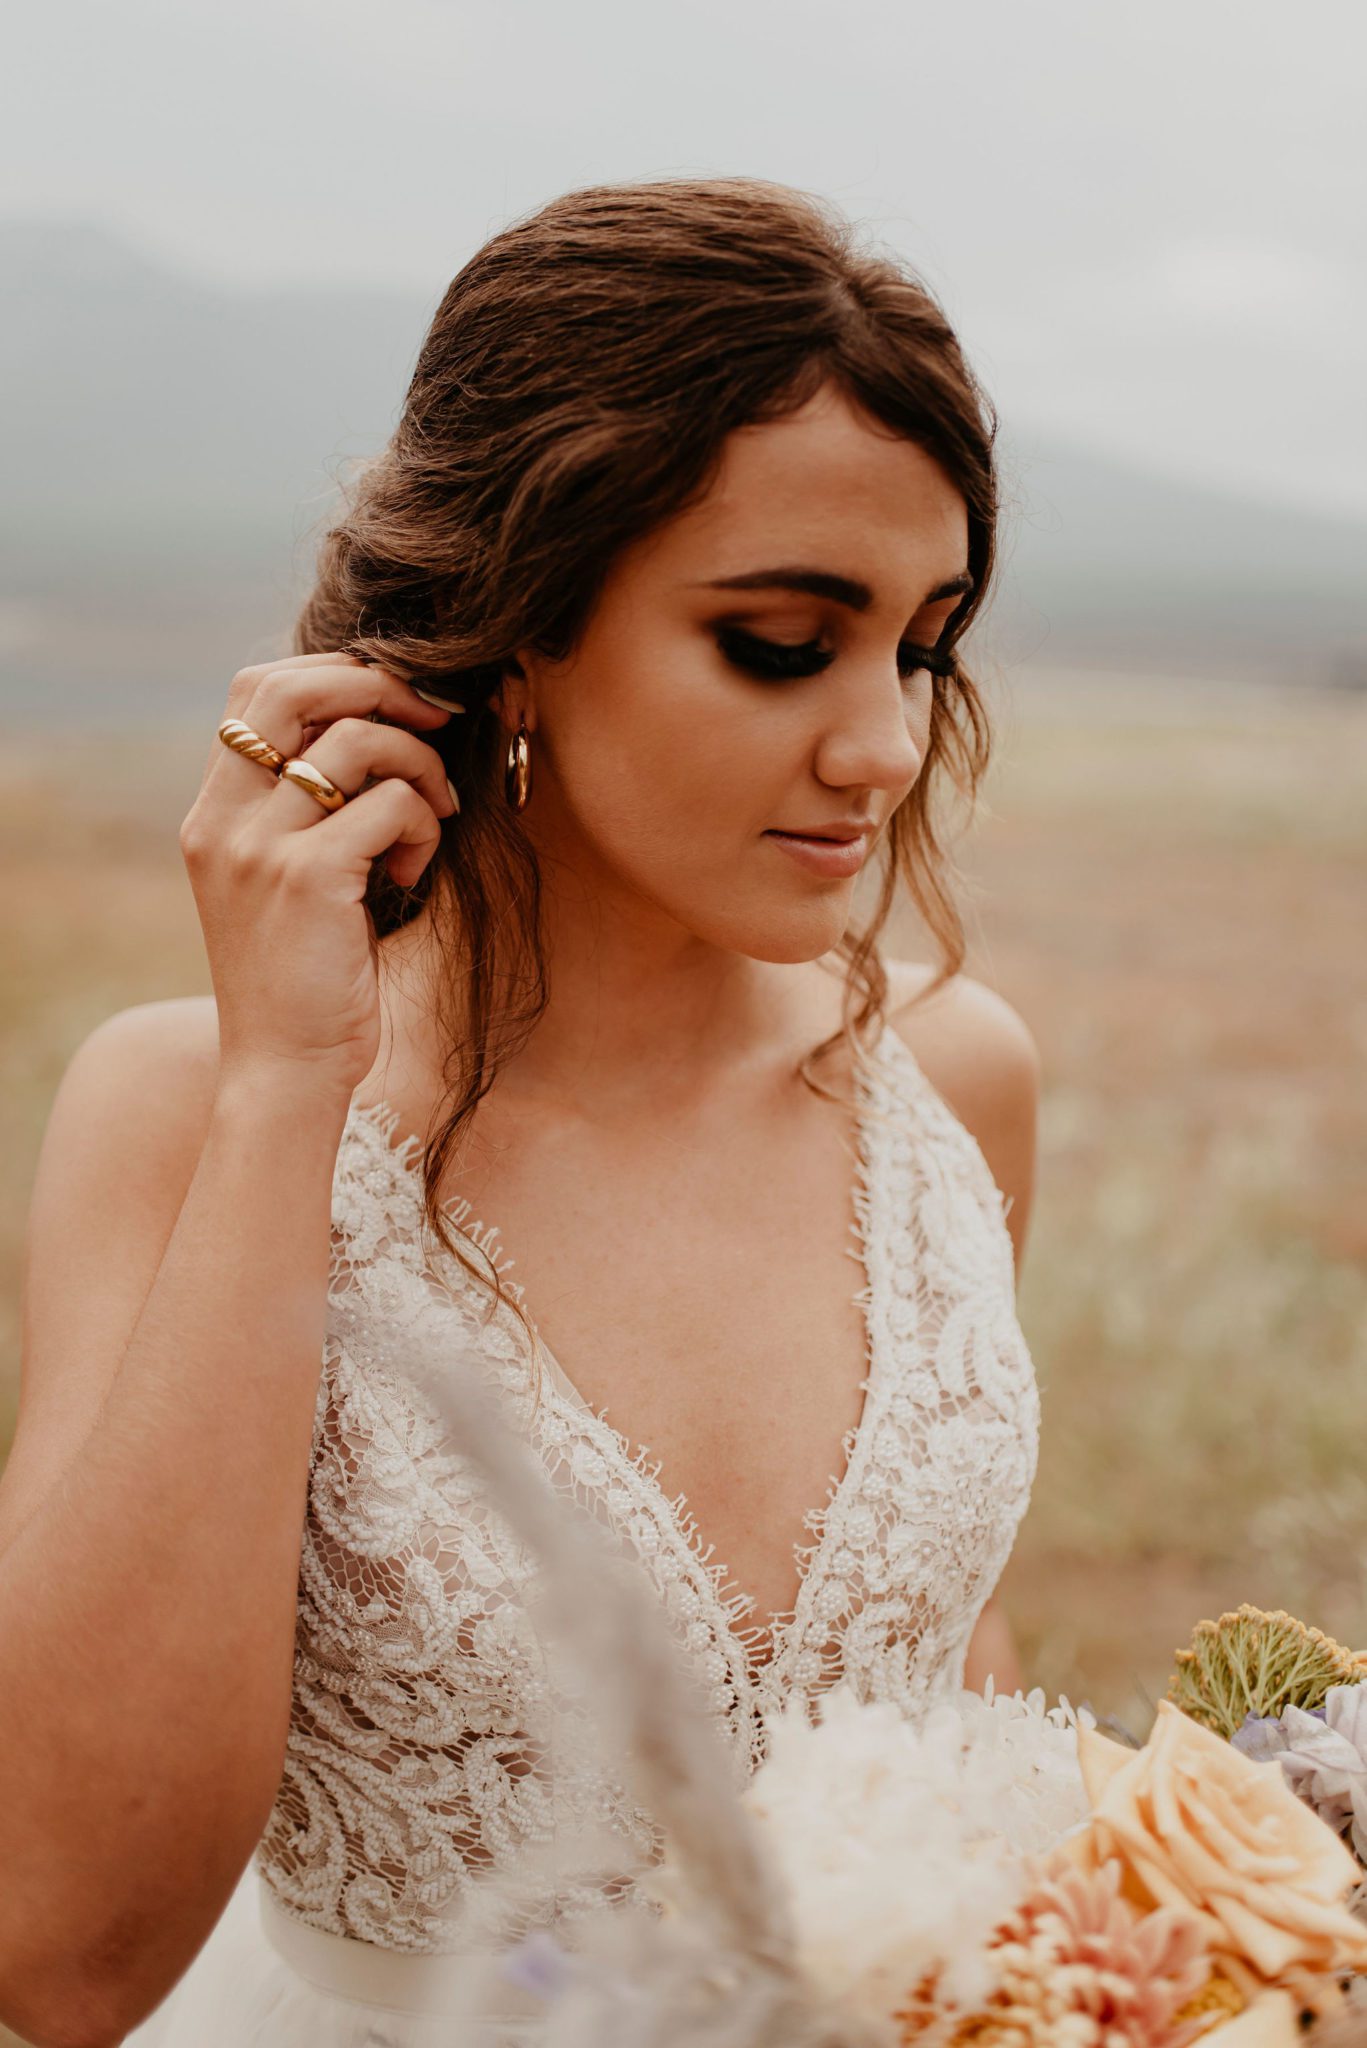 Gold boho bride jewelry from House of Vi